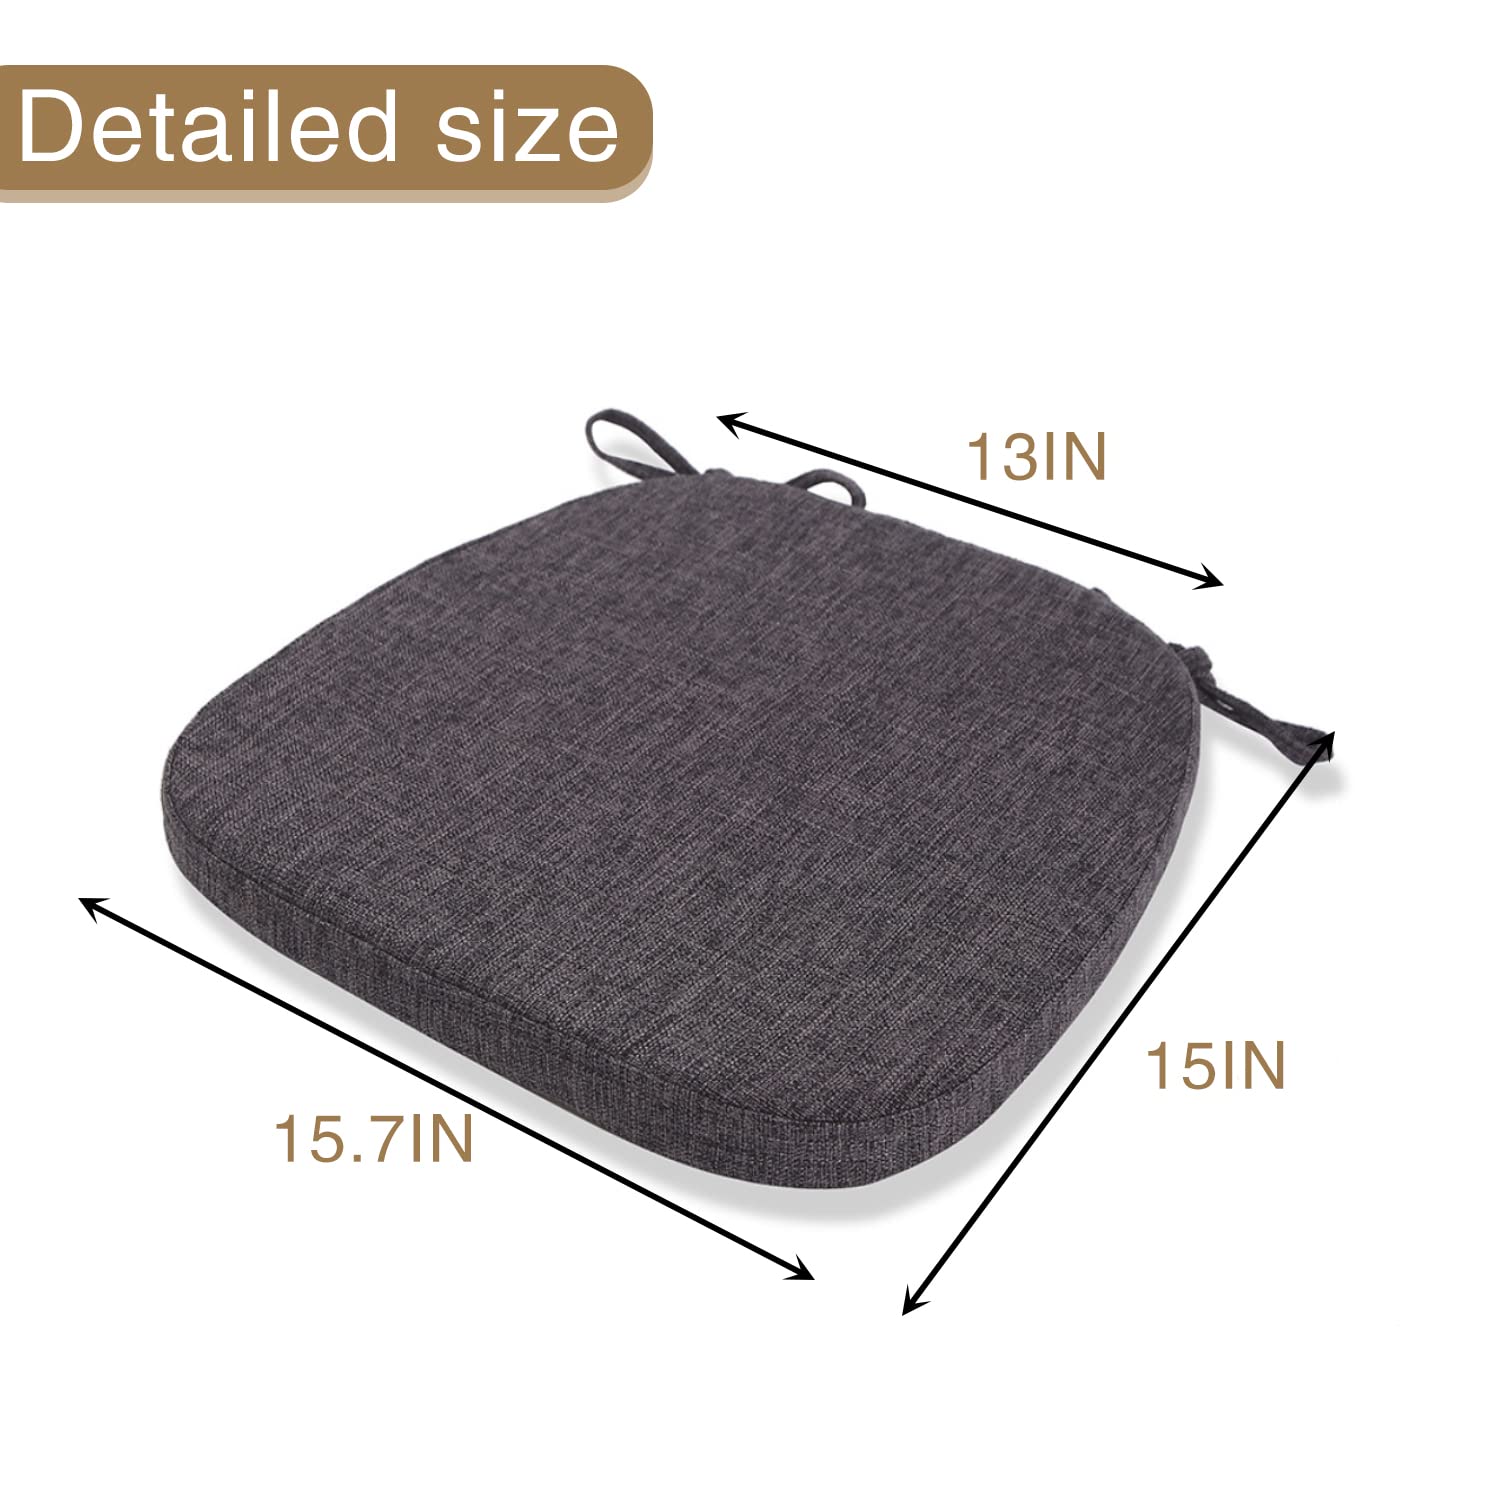 Kimgull Chair Cushions with Ties, Non Slip Chair Pads Set of 4, Thickened Breathable Cover Detachable Seat Cushion, for Kitchen Dining Living Room Office Chair (15.7x15x1.2In Grey)